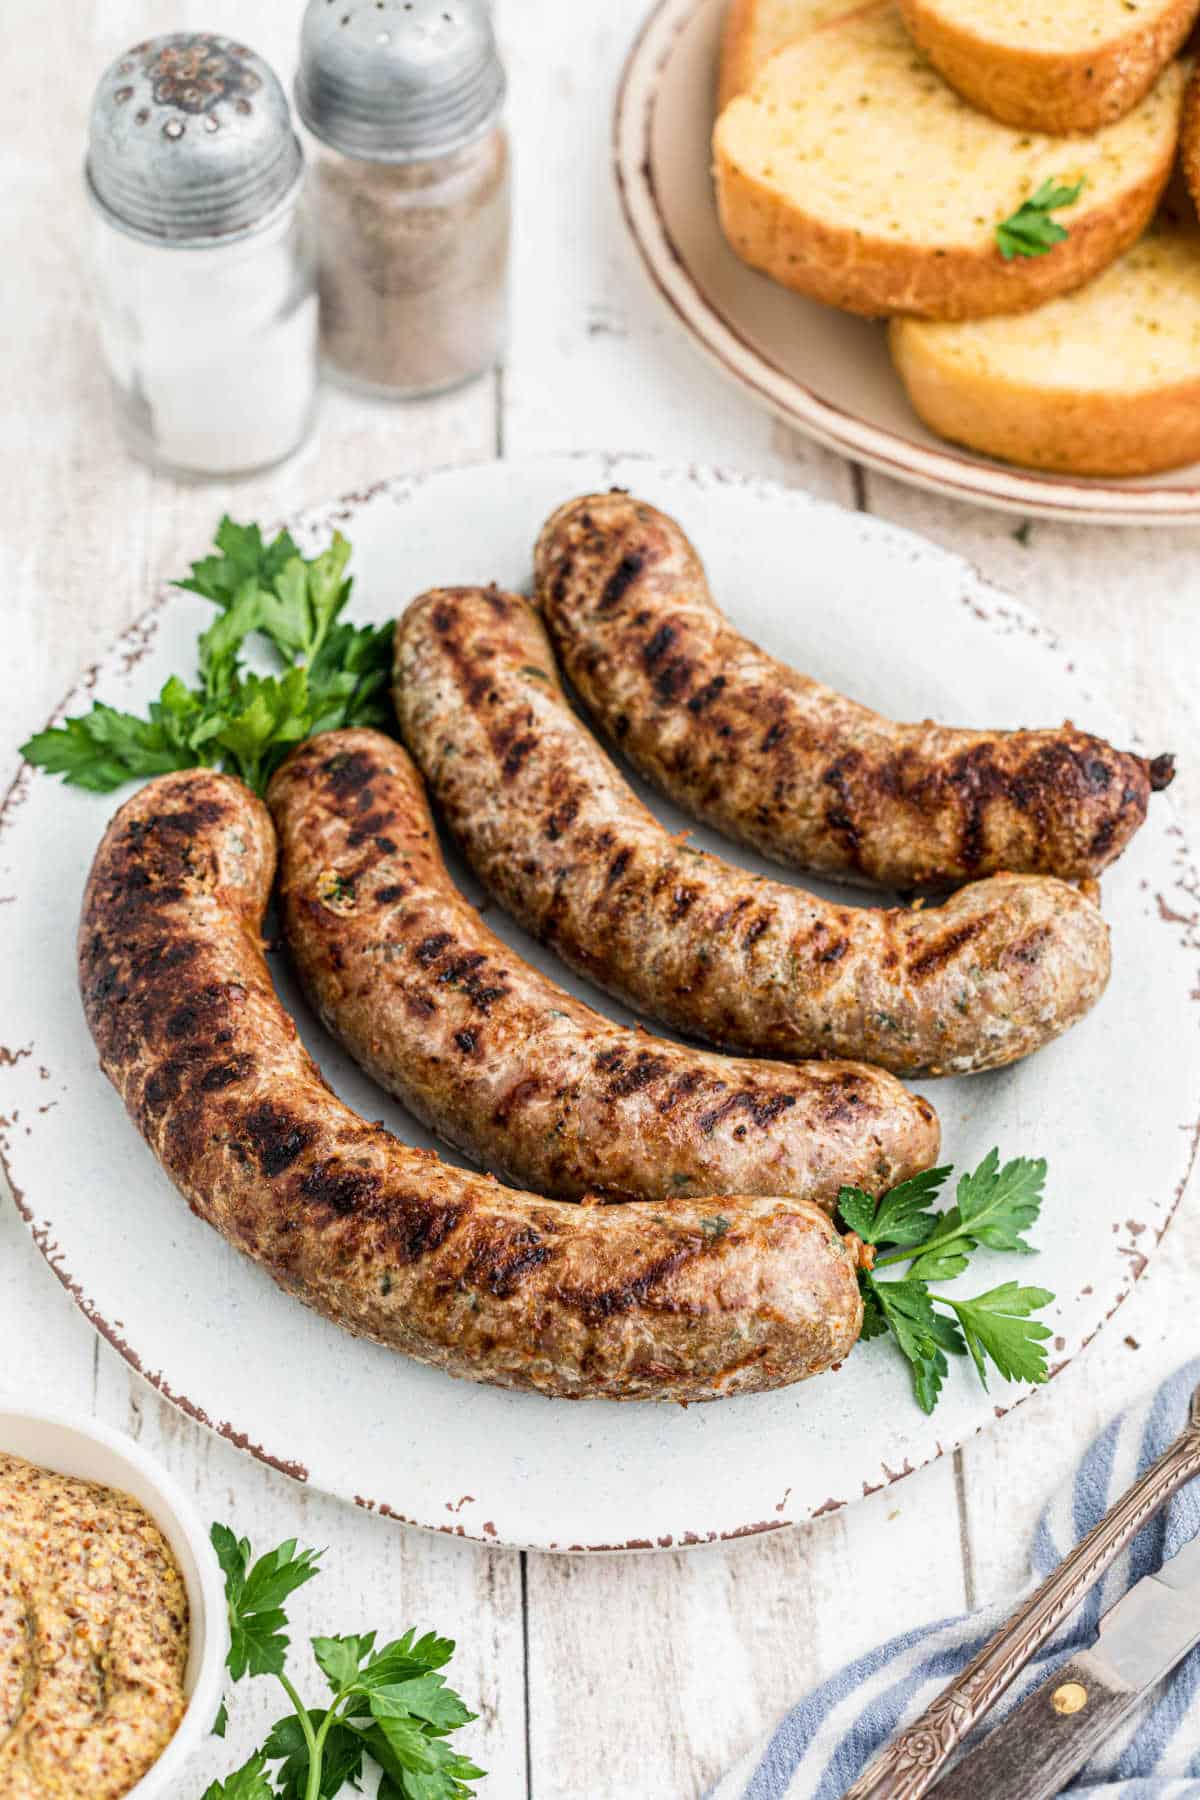 four links of homemade boudin sausage on a plate